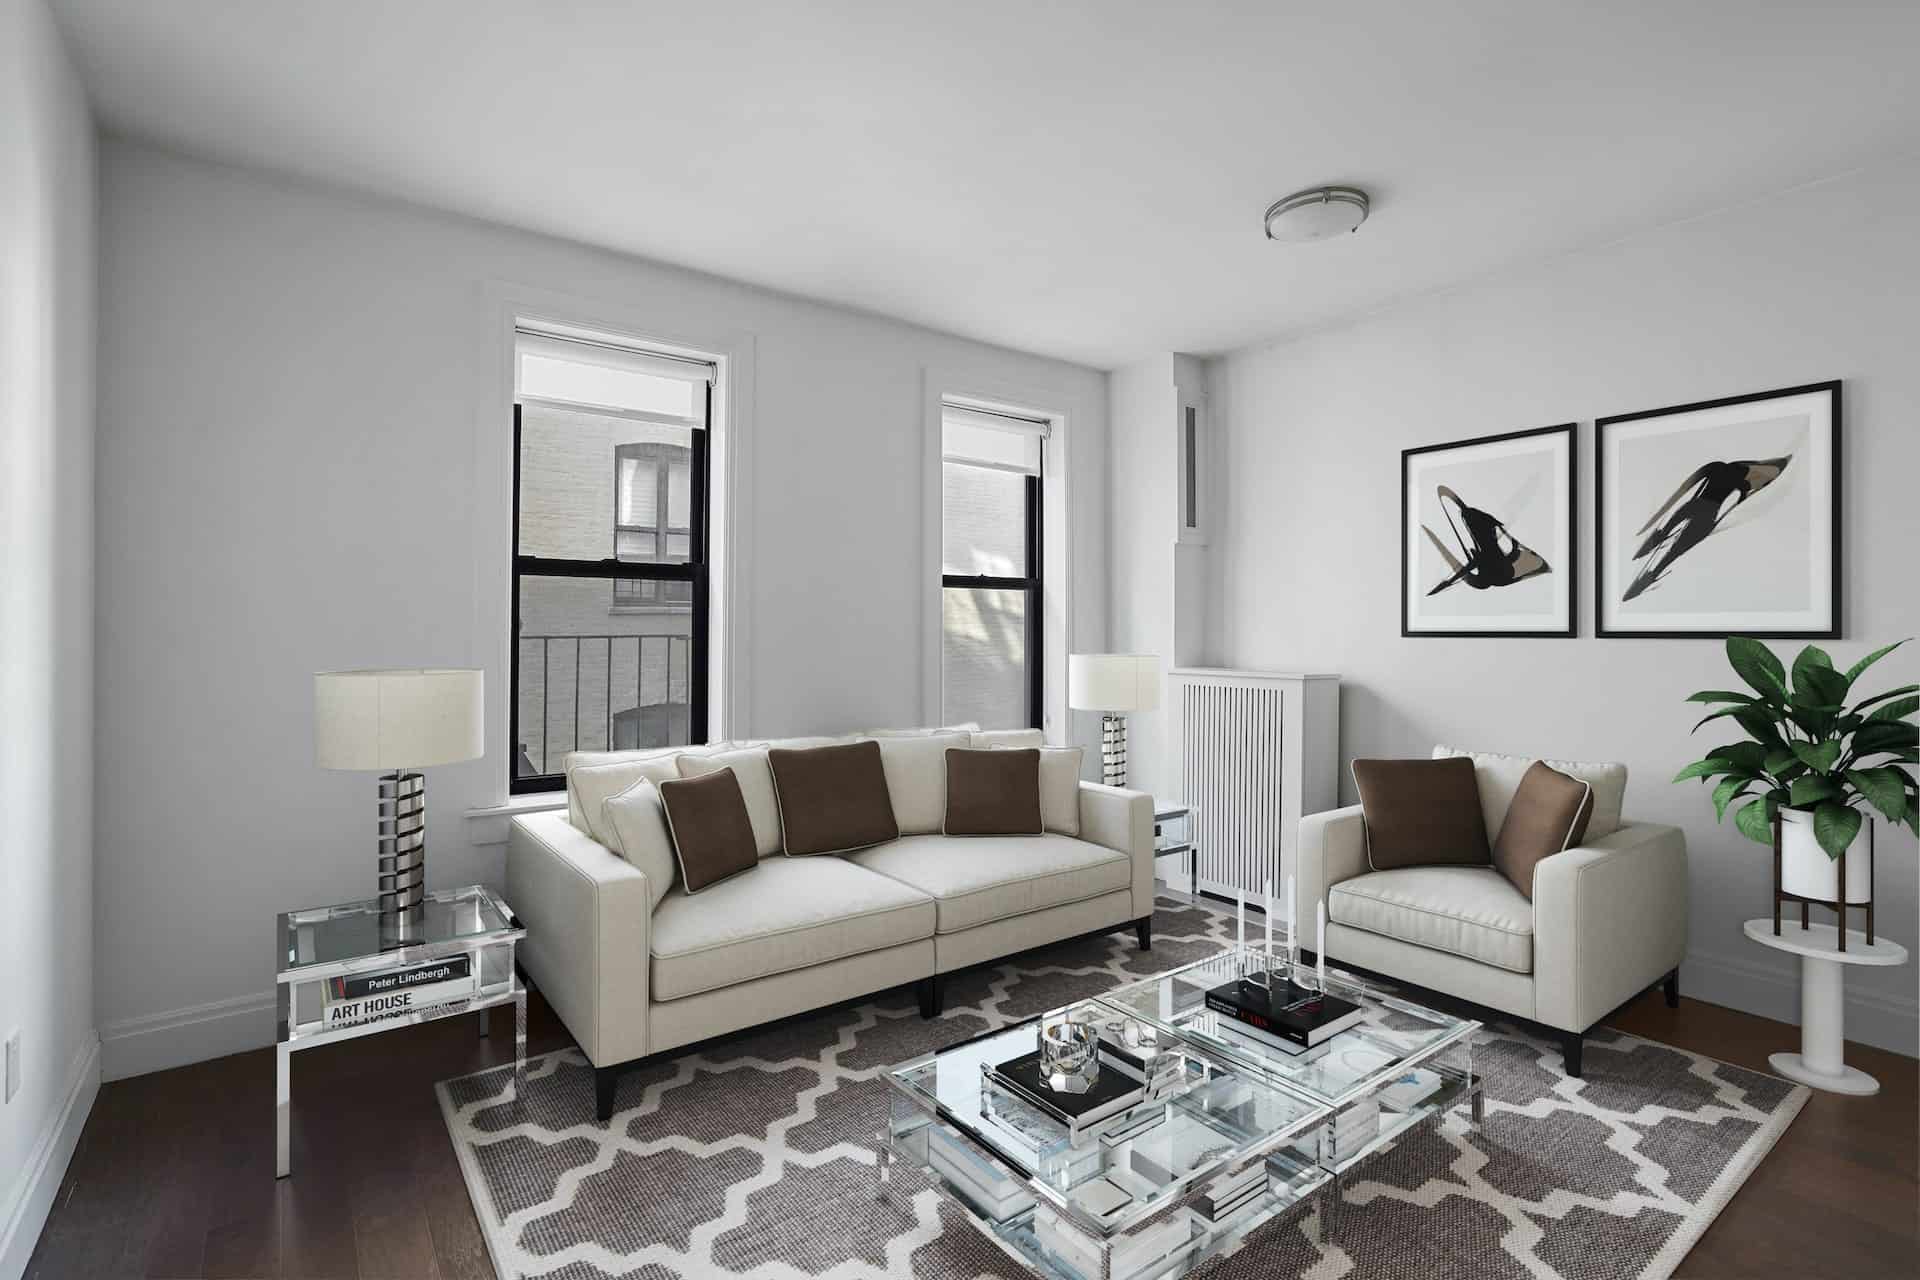 Living room at 556-566 West 126th Street apartments with a couch, chair, glass coffee table, hardwood floors and two windows.